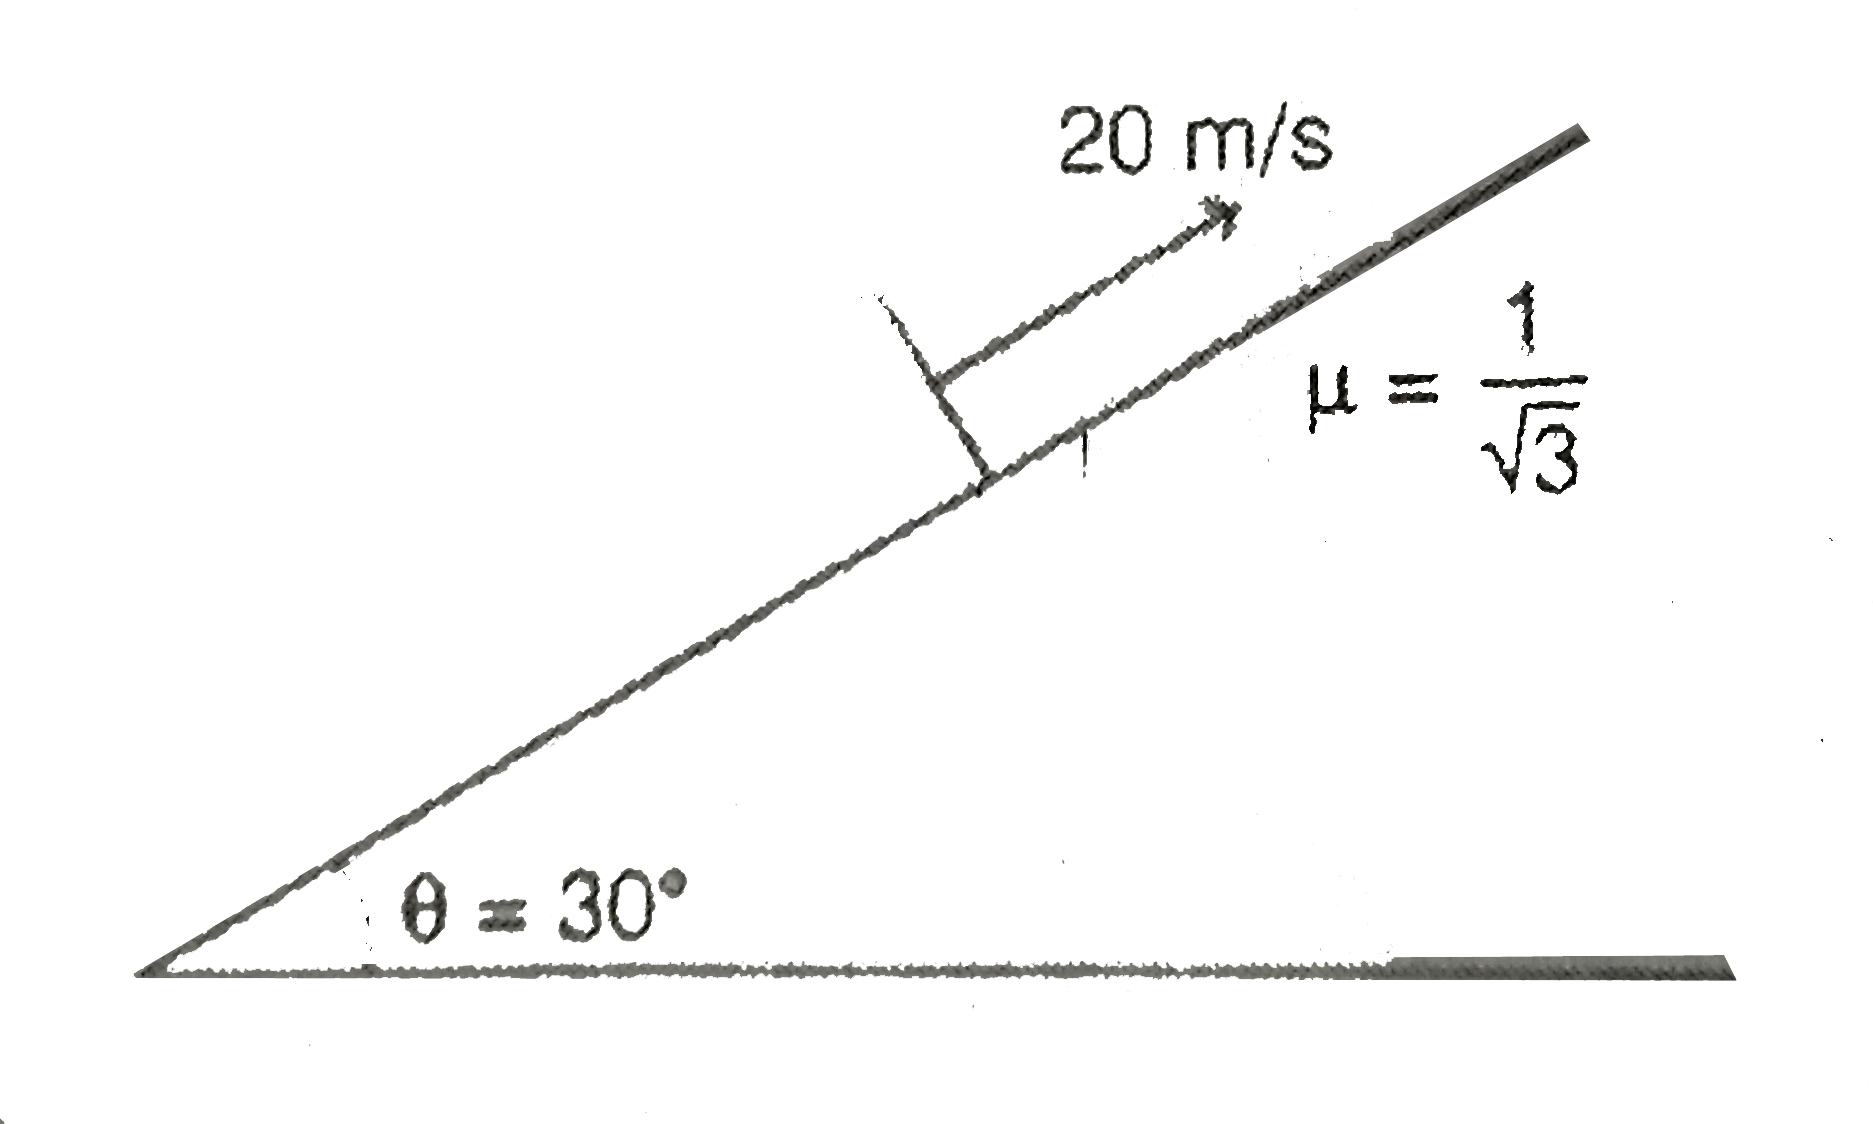 A block is projected upwards on a rough inclined plane at 20 m/s. let the time in going up, then is equal to